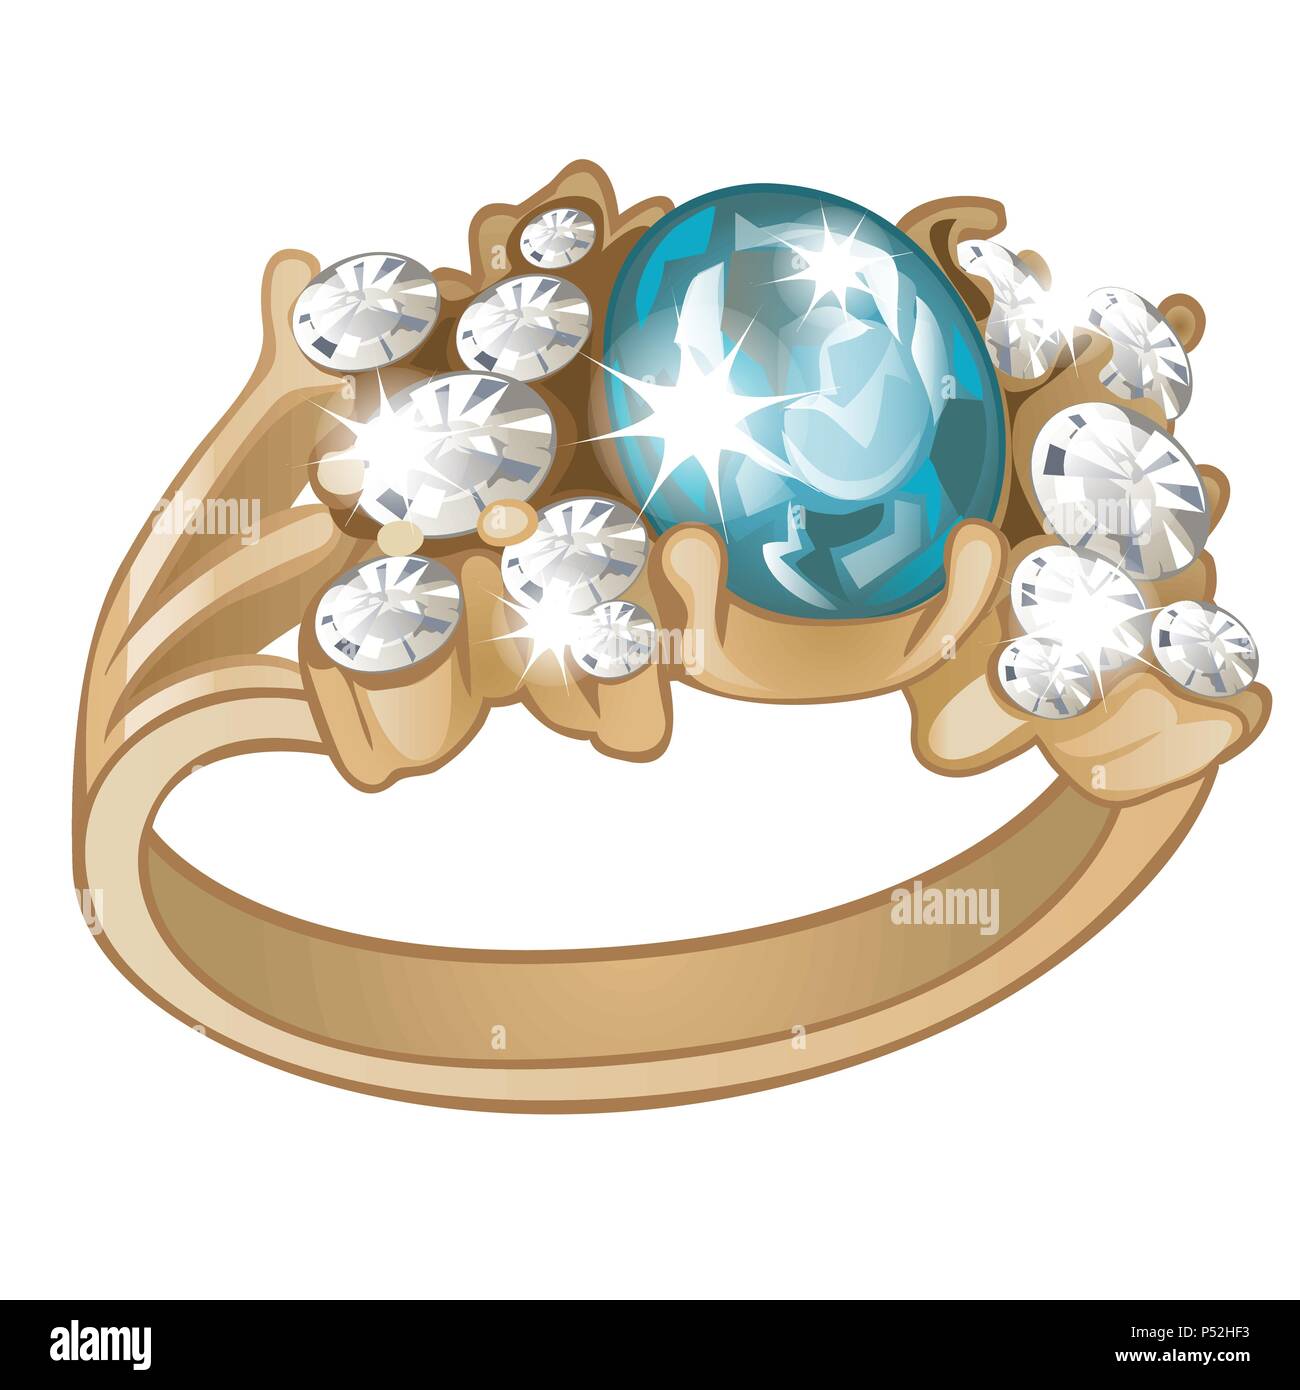 Exclusive ring made of gold with inlaid blue aquamarine and diamonds isolated on white background. An instance of boutique jewelry. Vector illustration. Stock Vector